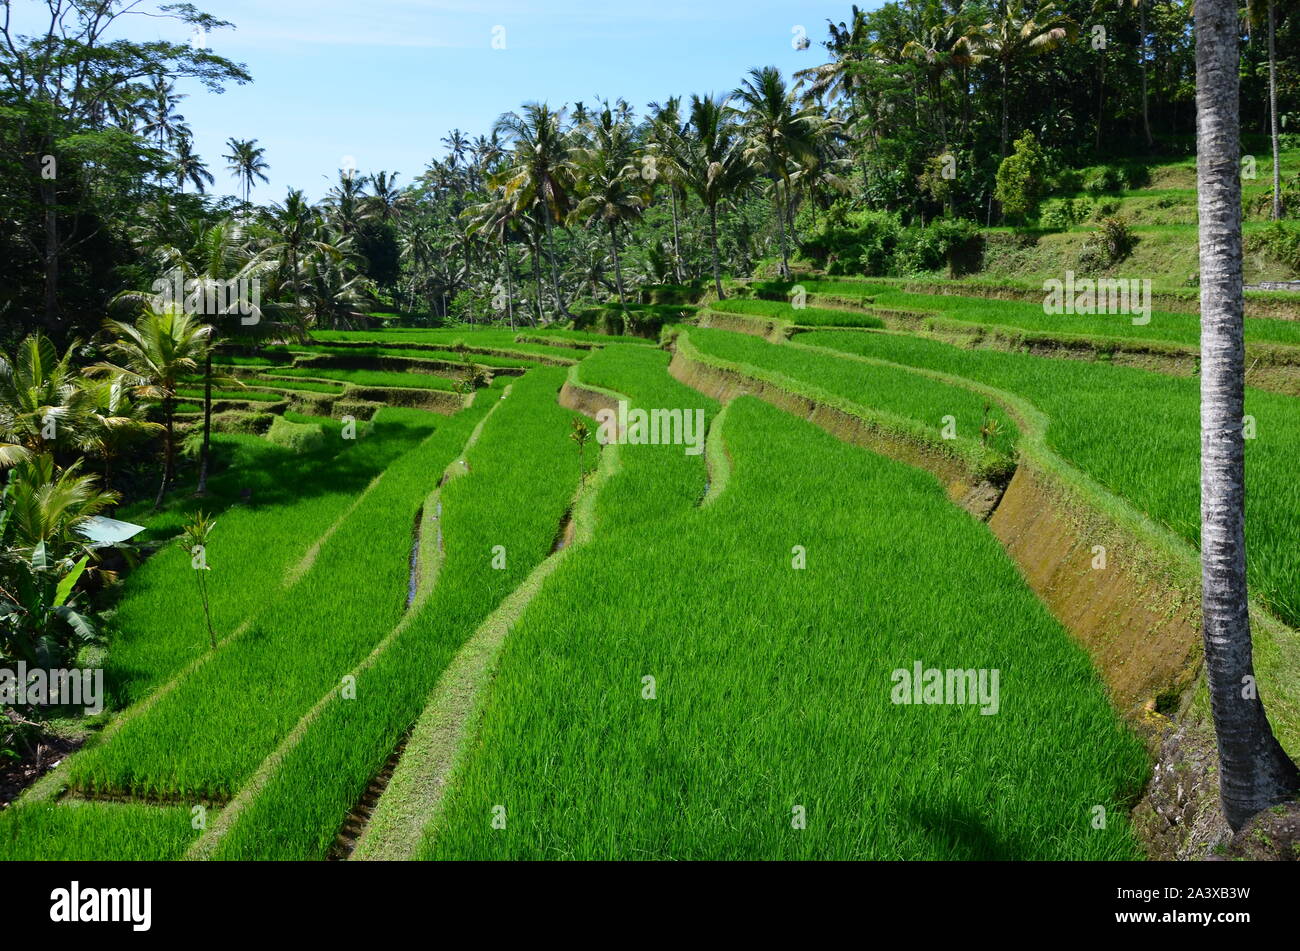 The view of the jungle and rice terraces Stock Photo